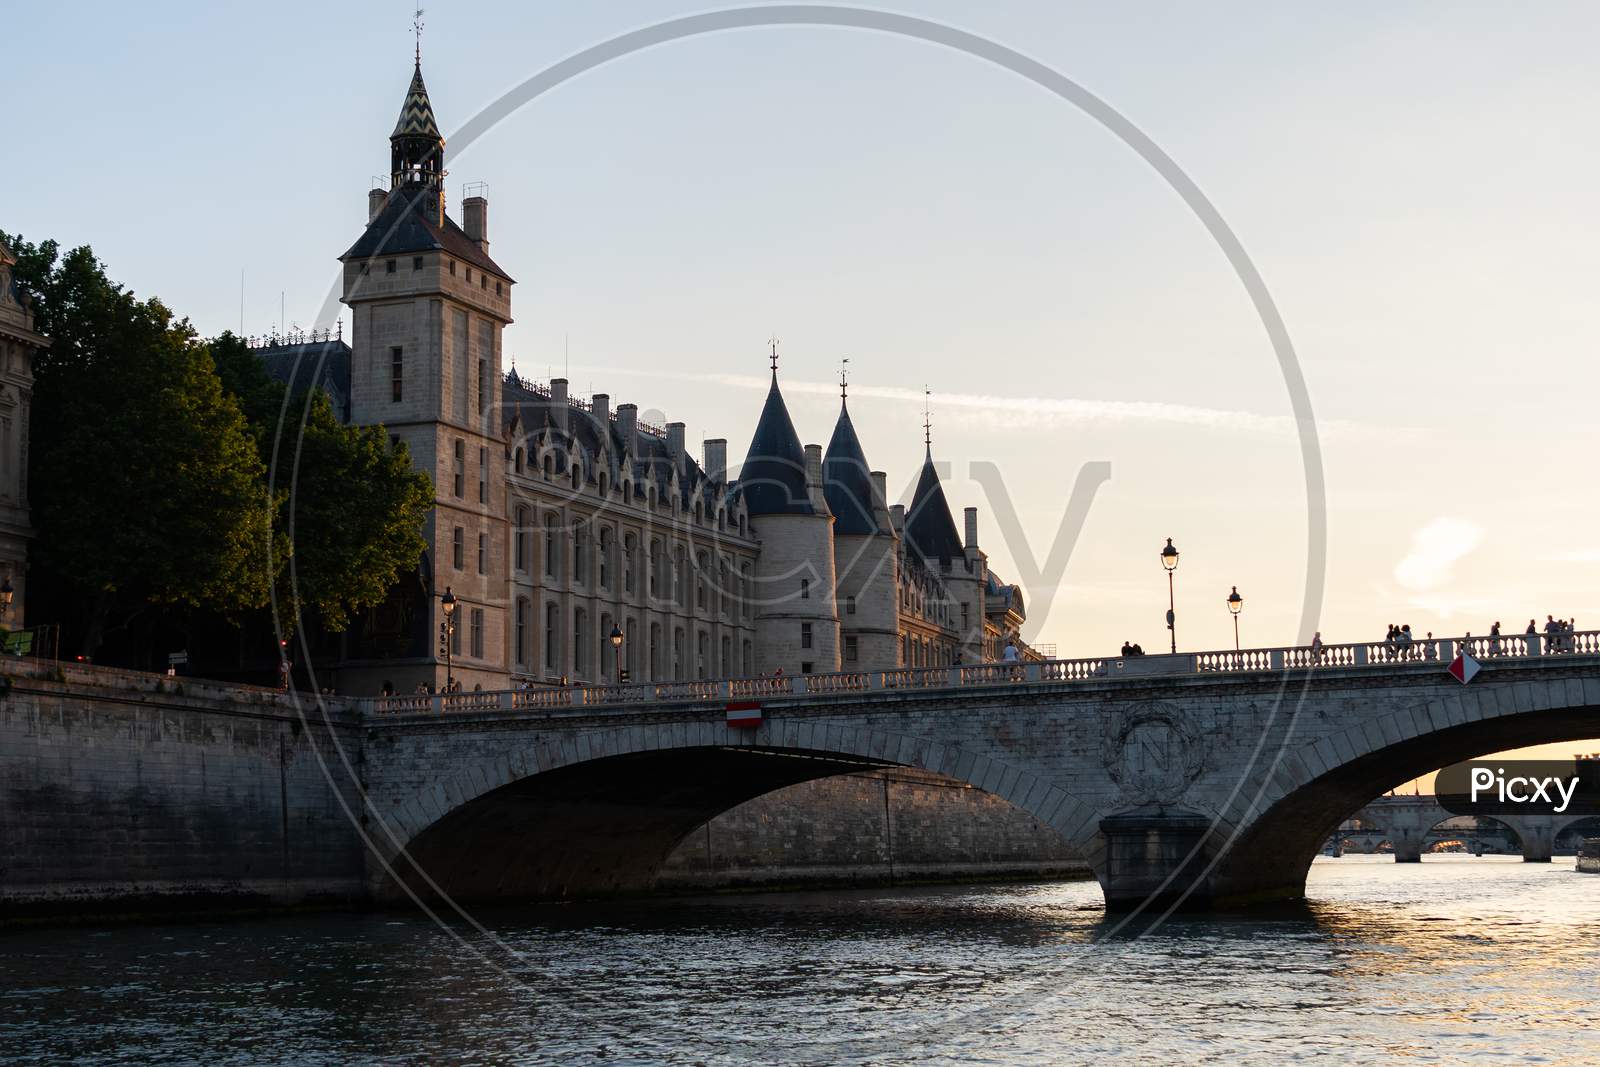 The Conciergerie And The Bridge Pont Au Change Seen From The Seine River In Paris France At Sunset.